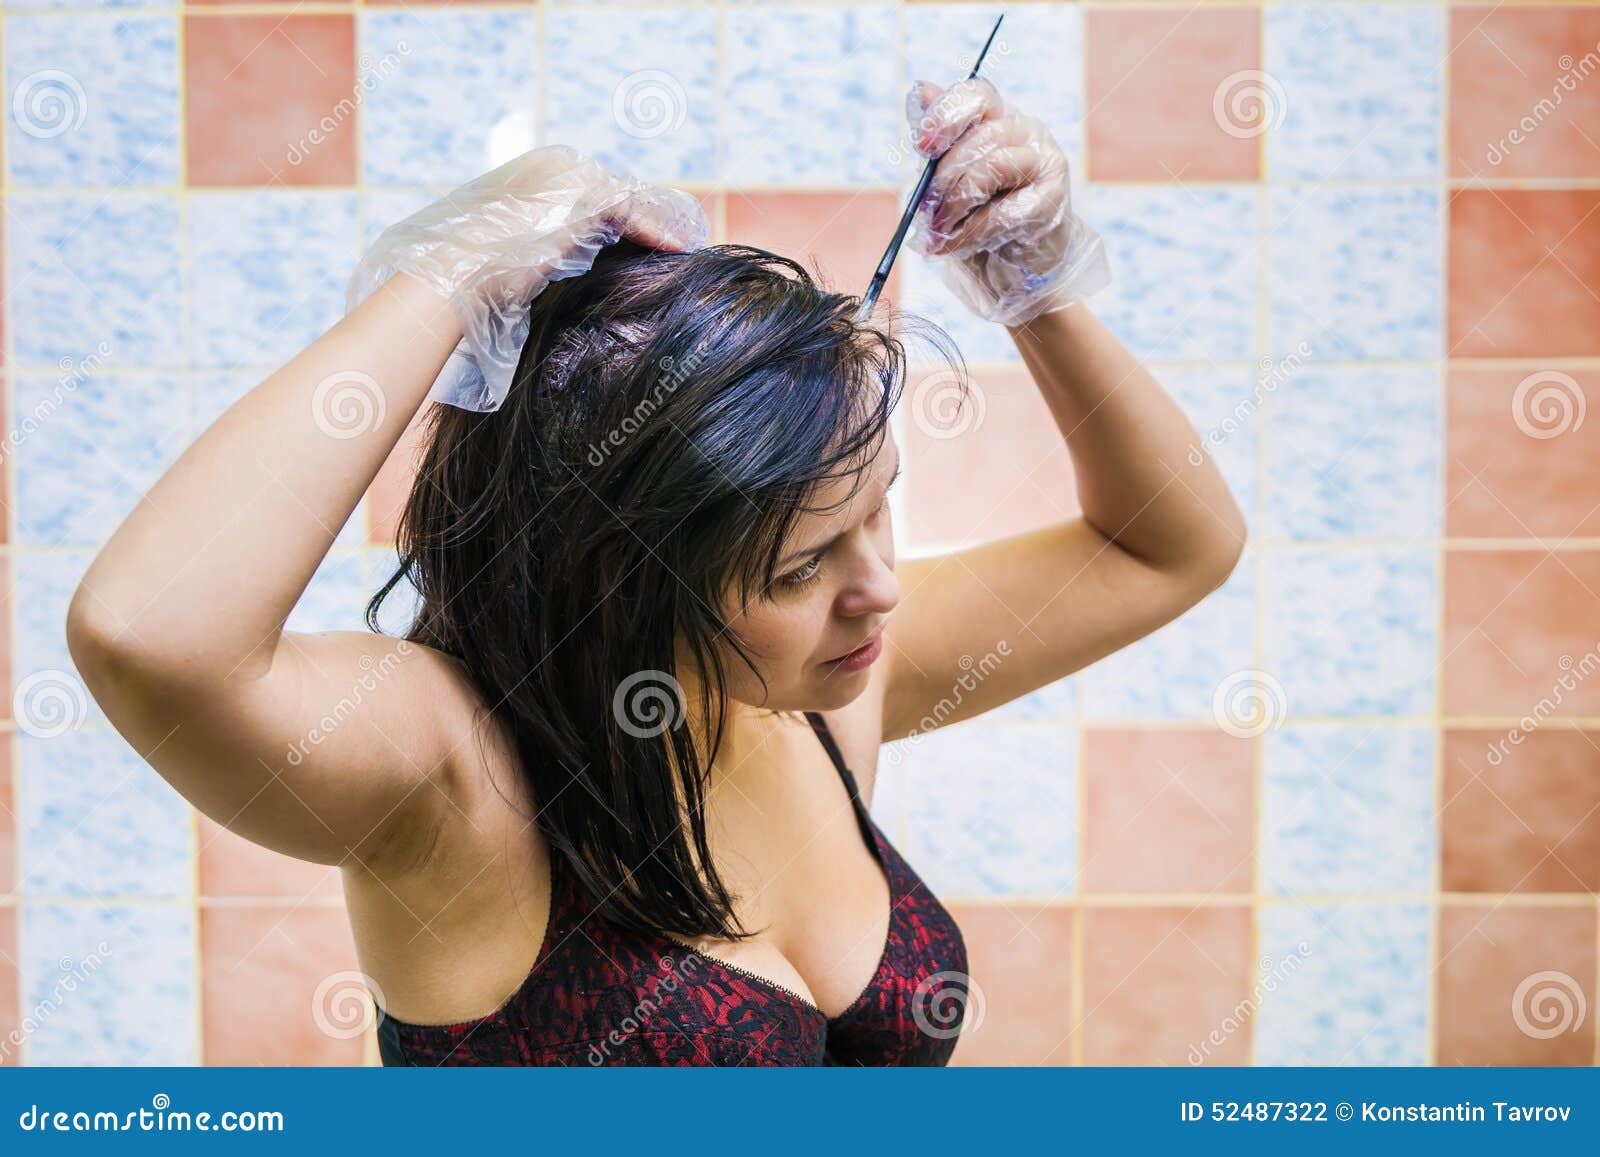 woman dyeing hairs